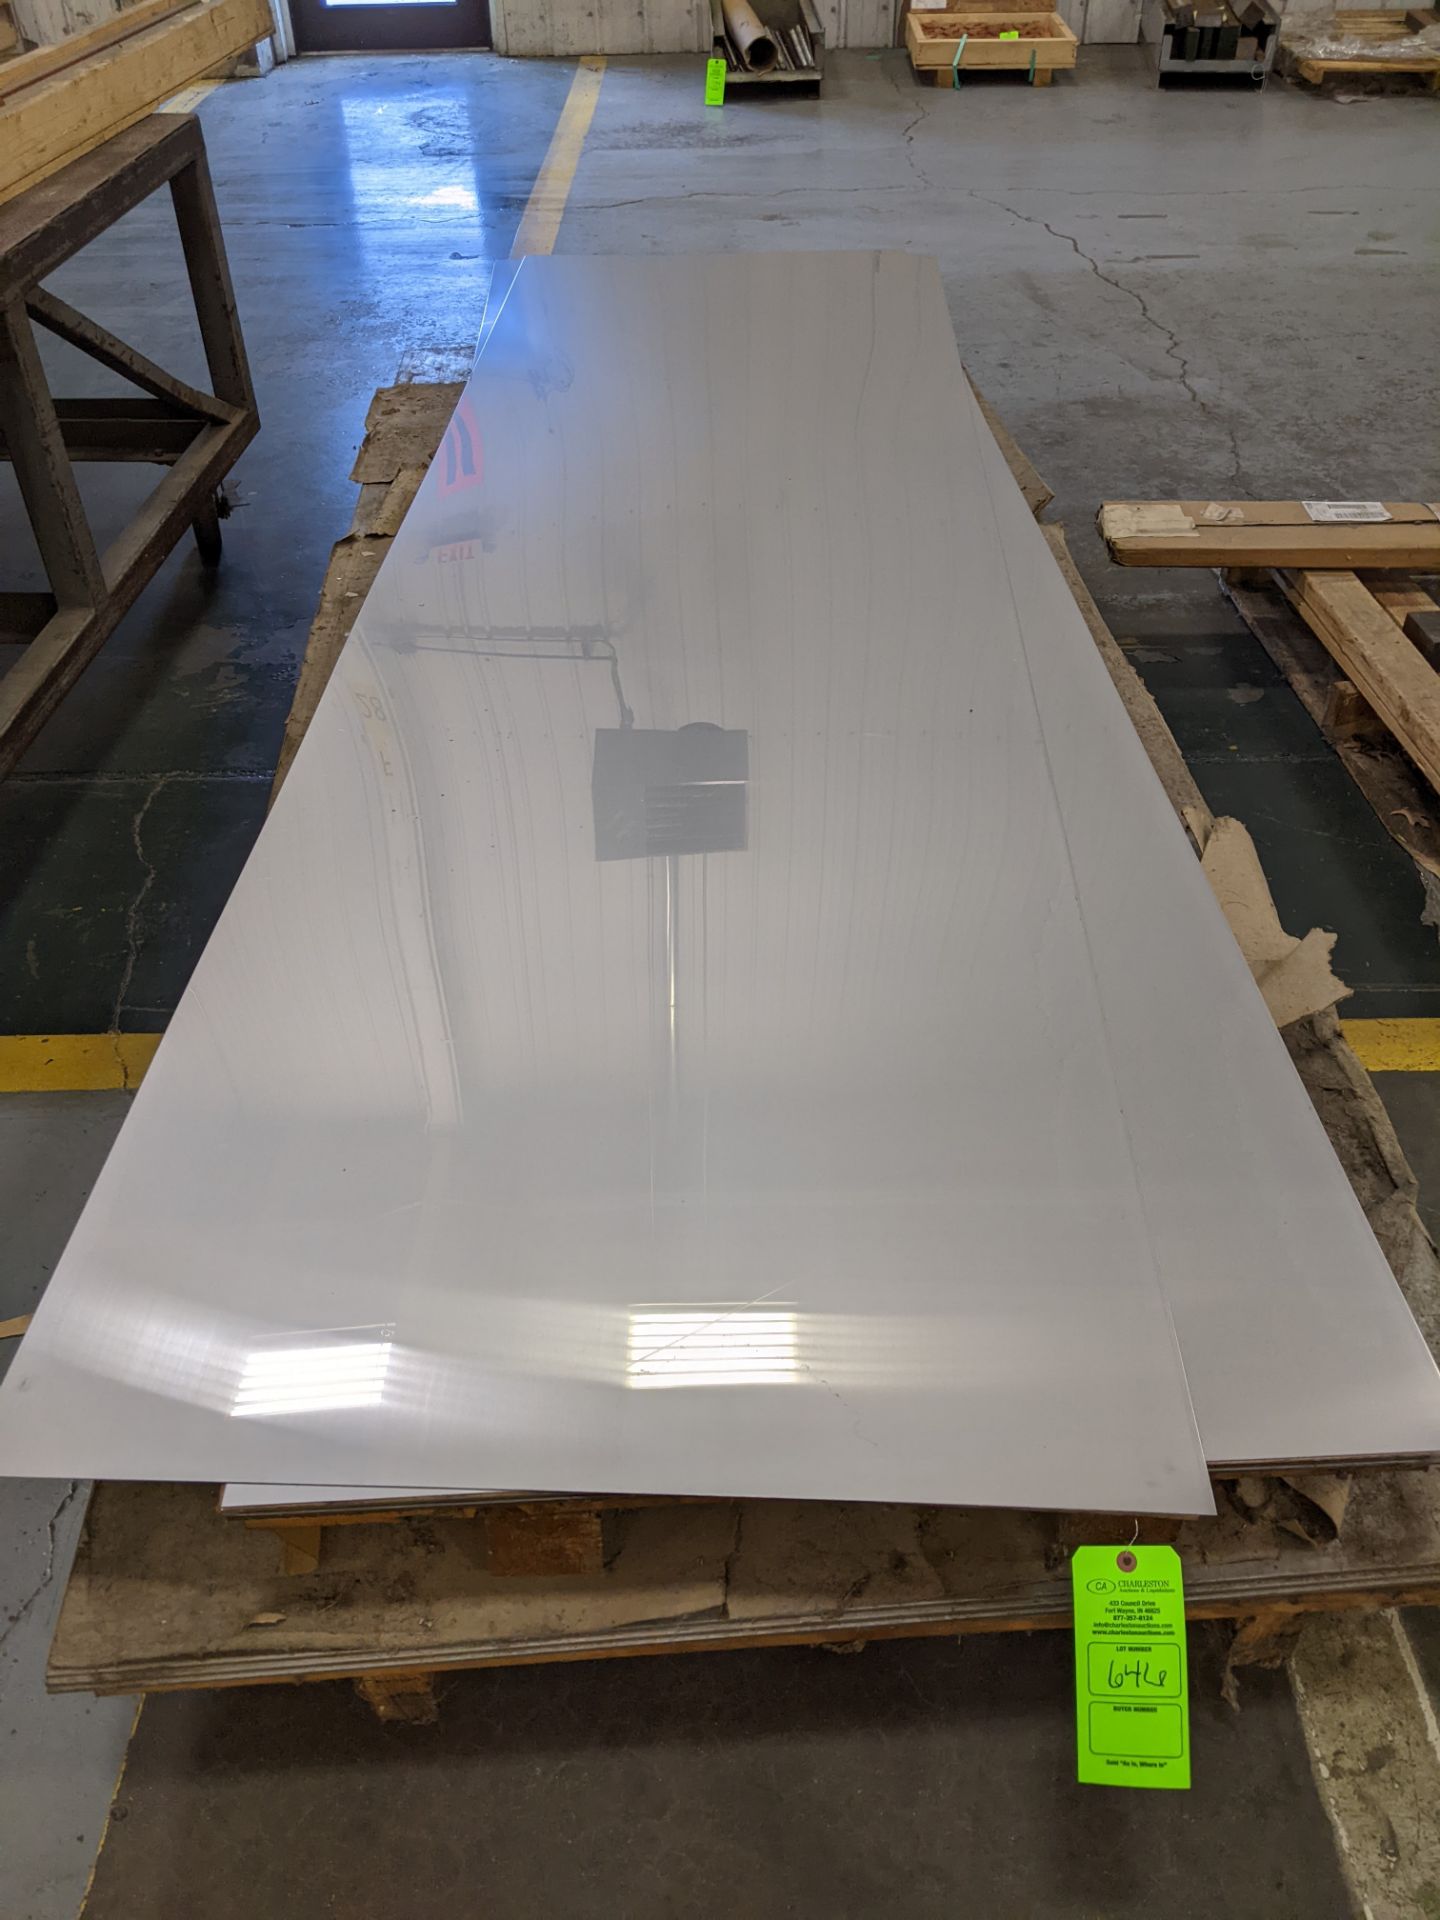 APPROX 15 SHEETS OF 3X10 STAINLESS STEEL SHEET METAL AND (3) 1/4" 4X10 STAINLESS SHEETS